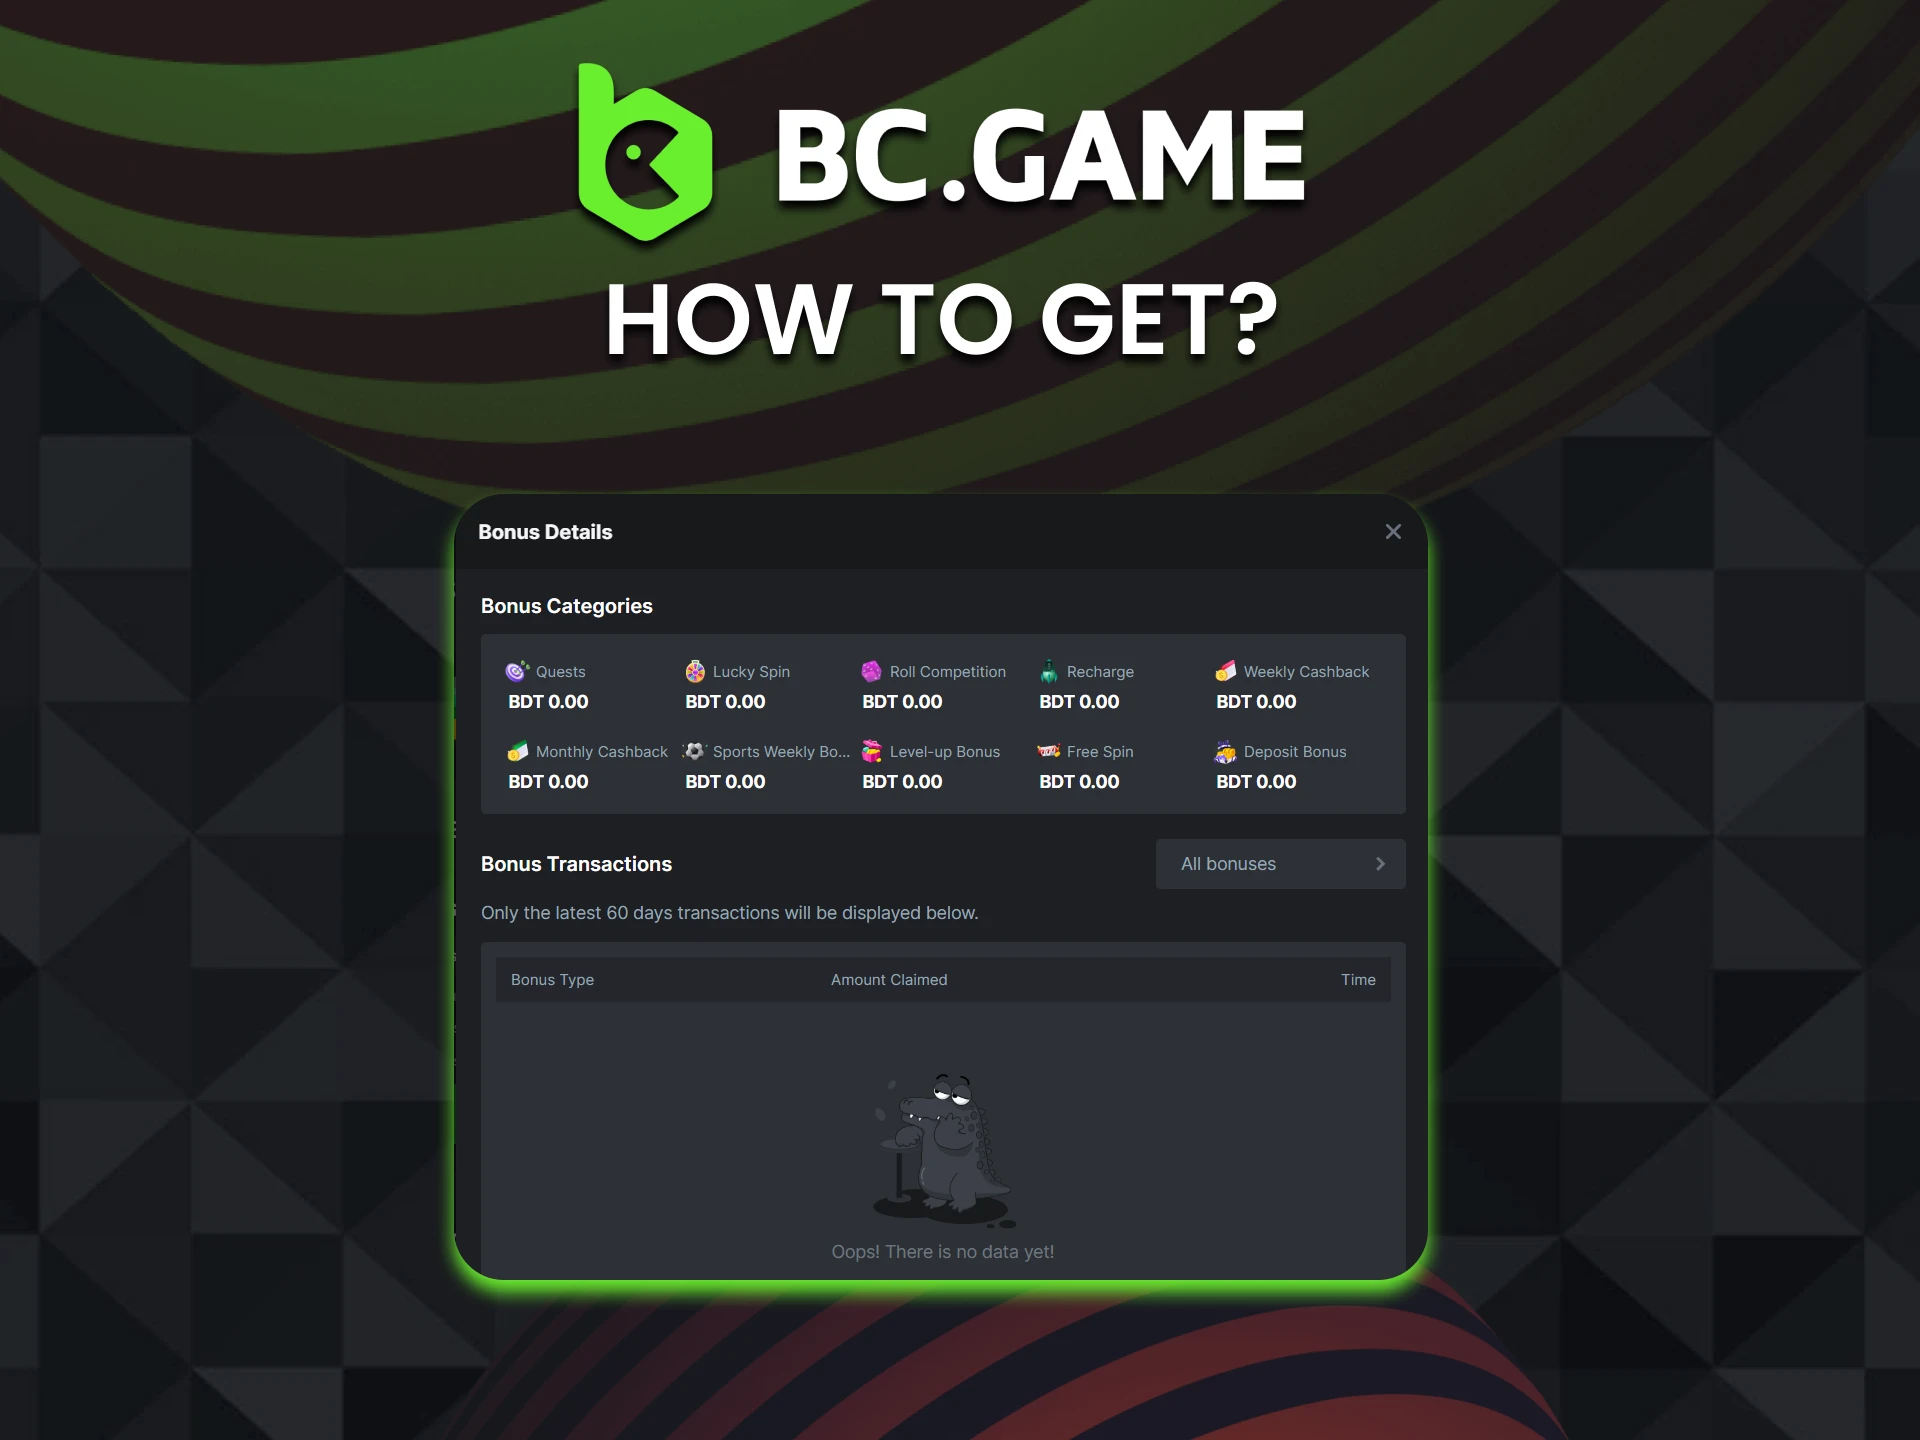 Register an account and deposit to get BC Game bonuses.